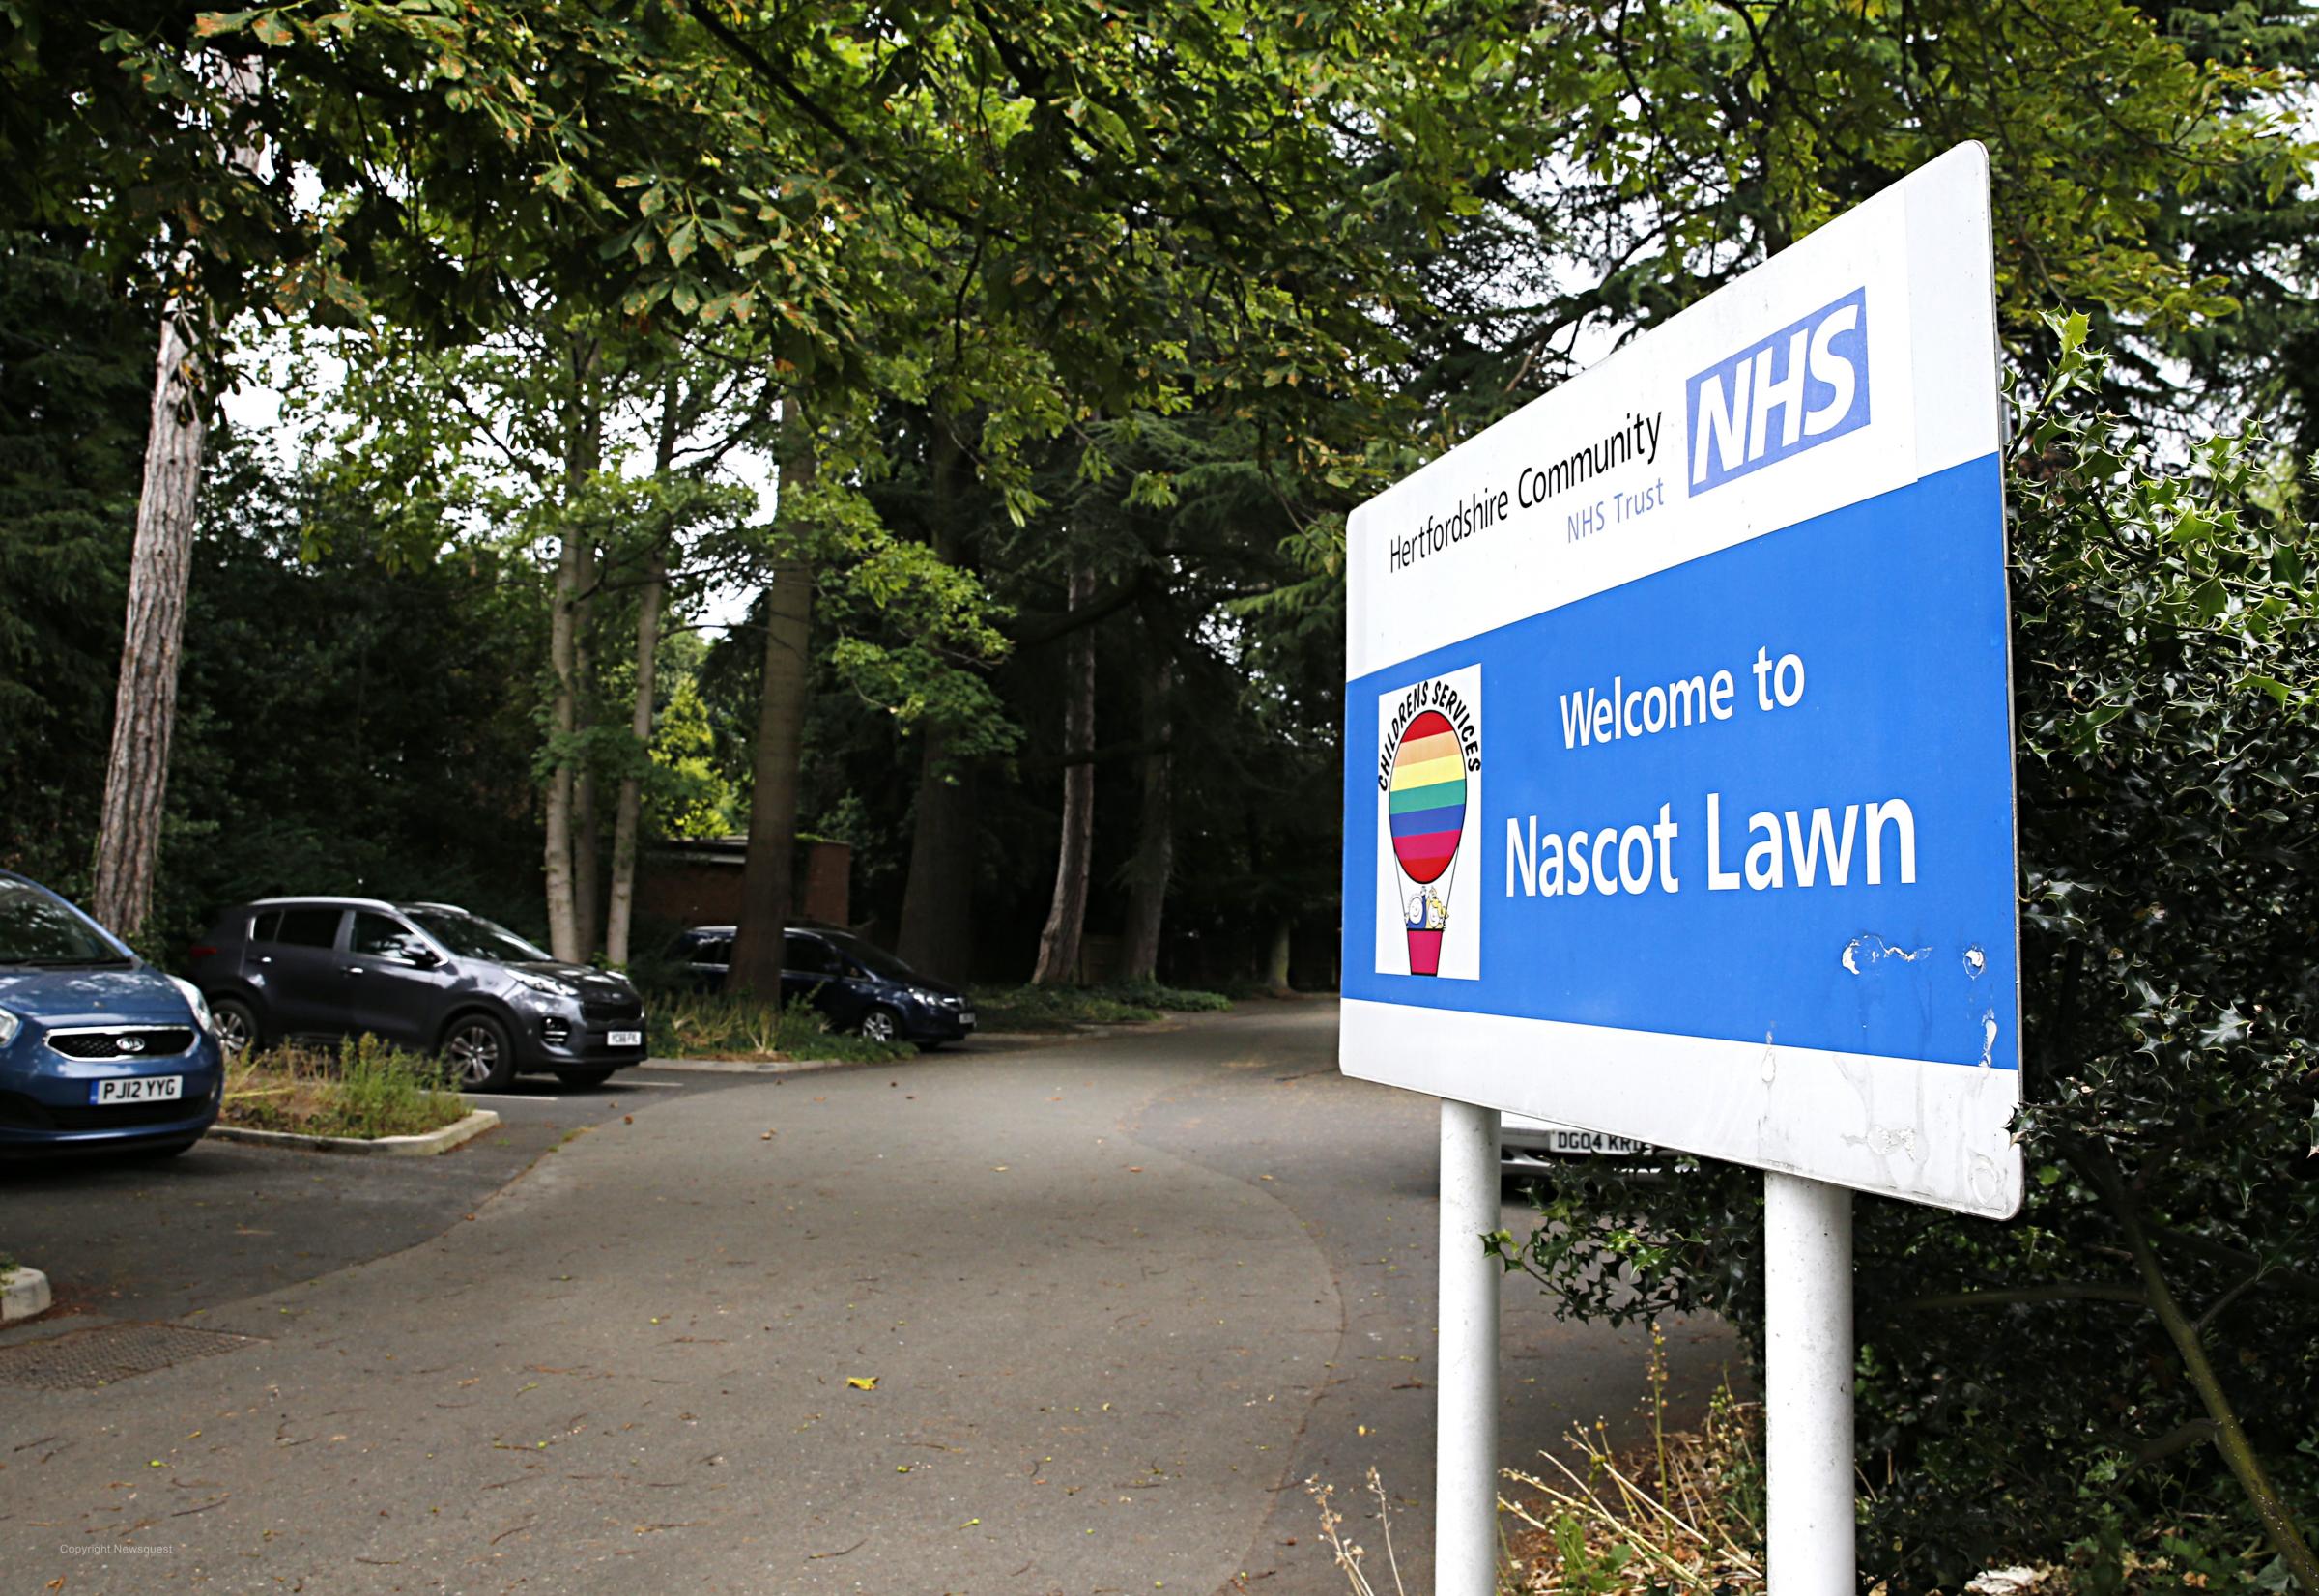 What does the council vote for saving Nascot Lawn disabled children's centre actually mean?